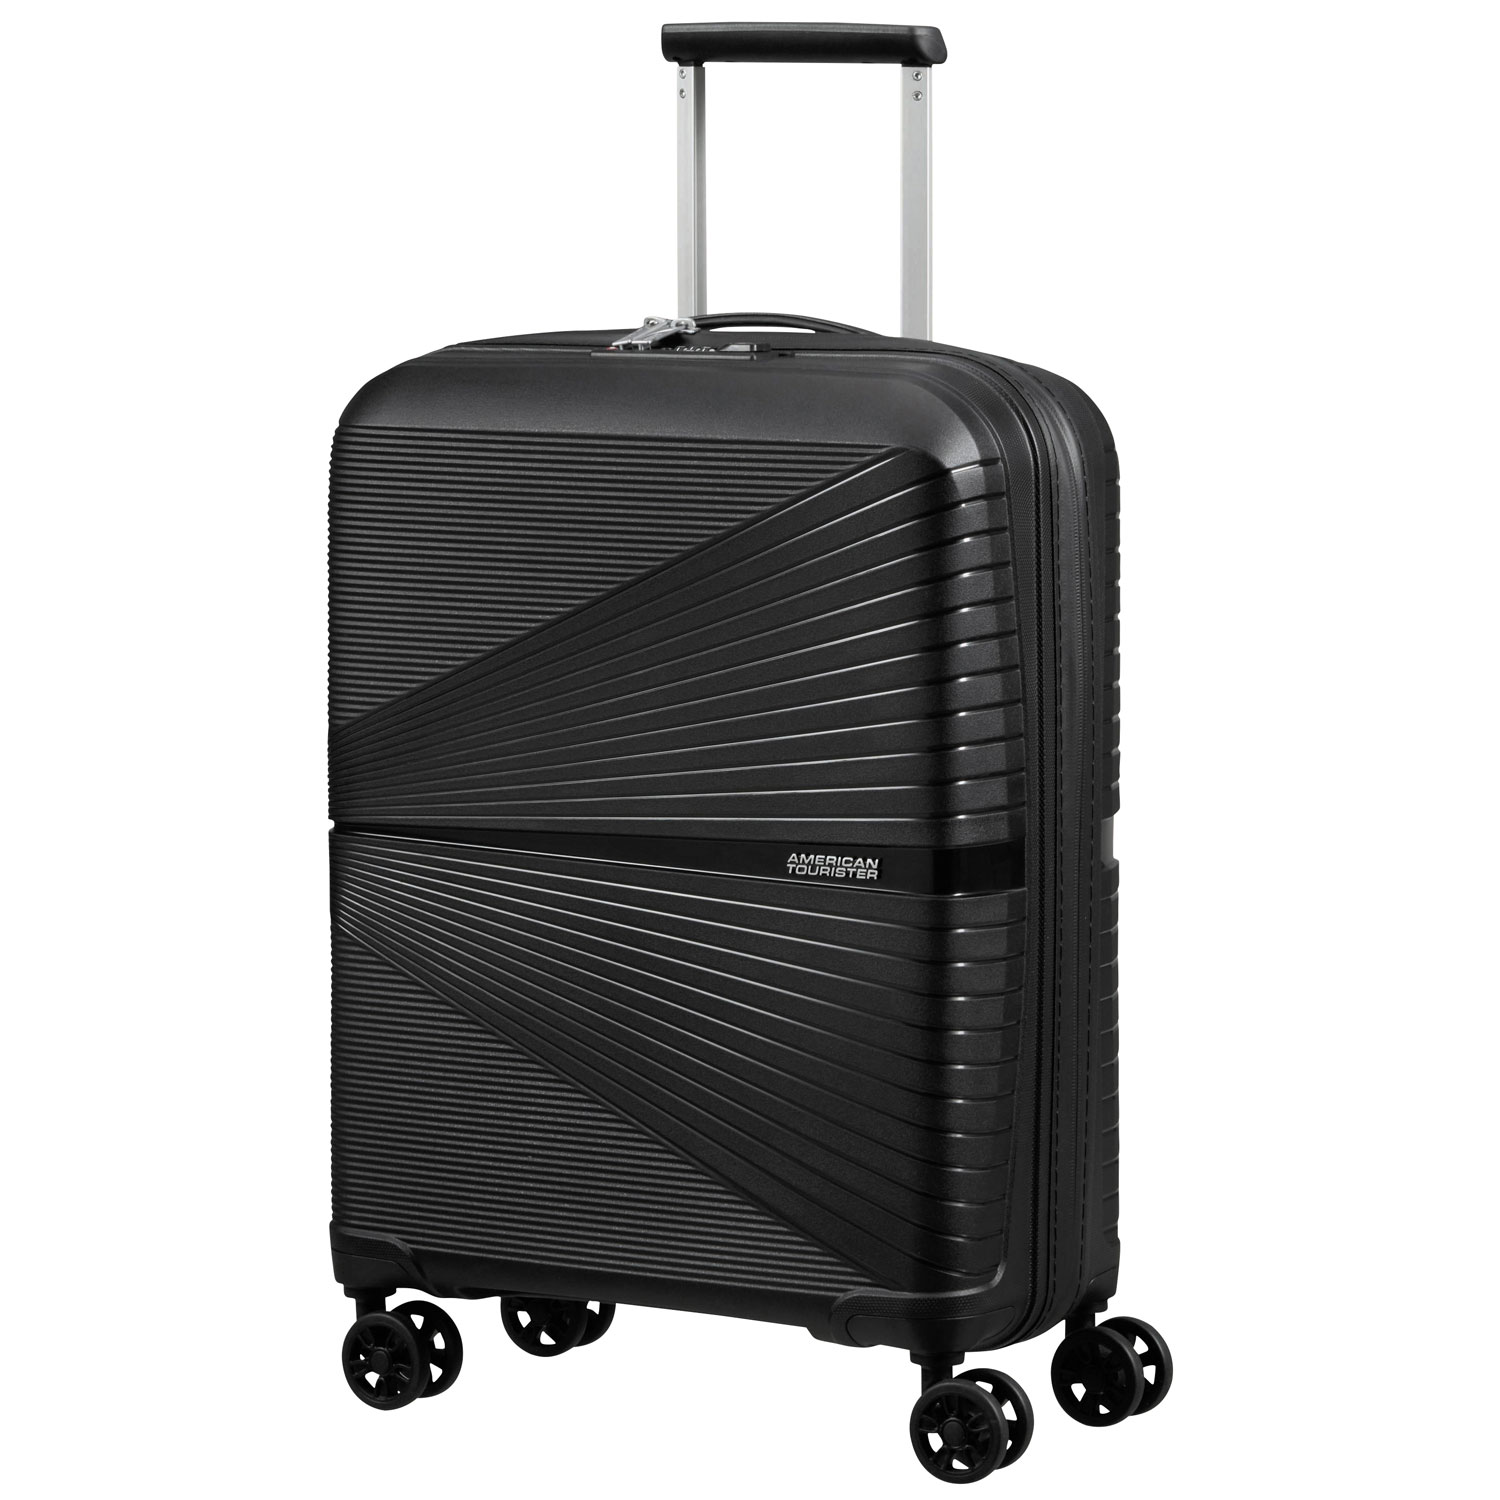 American Tourister Airconic 19" Hard Side Carry-On Luggage - Onyx Black